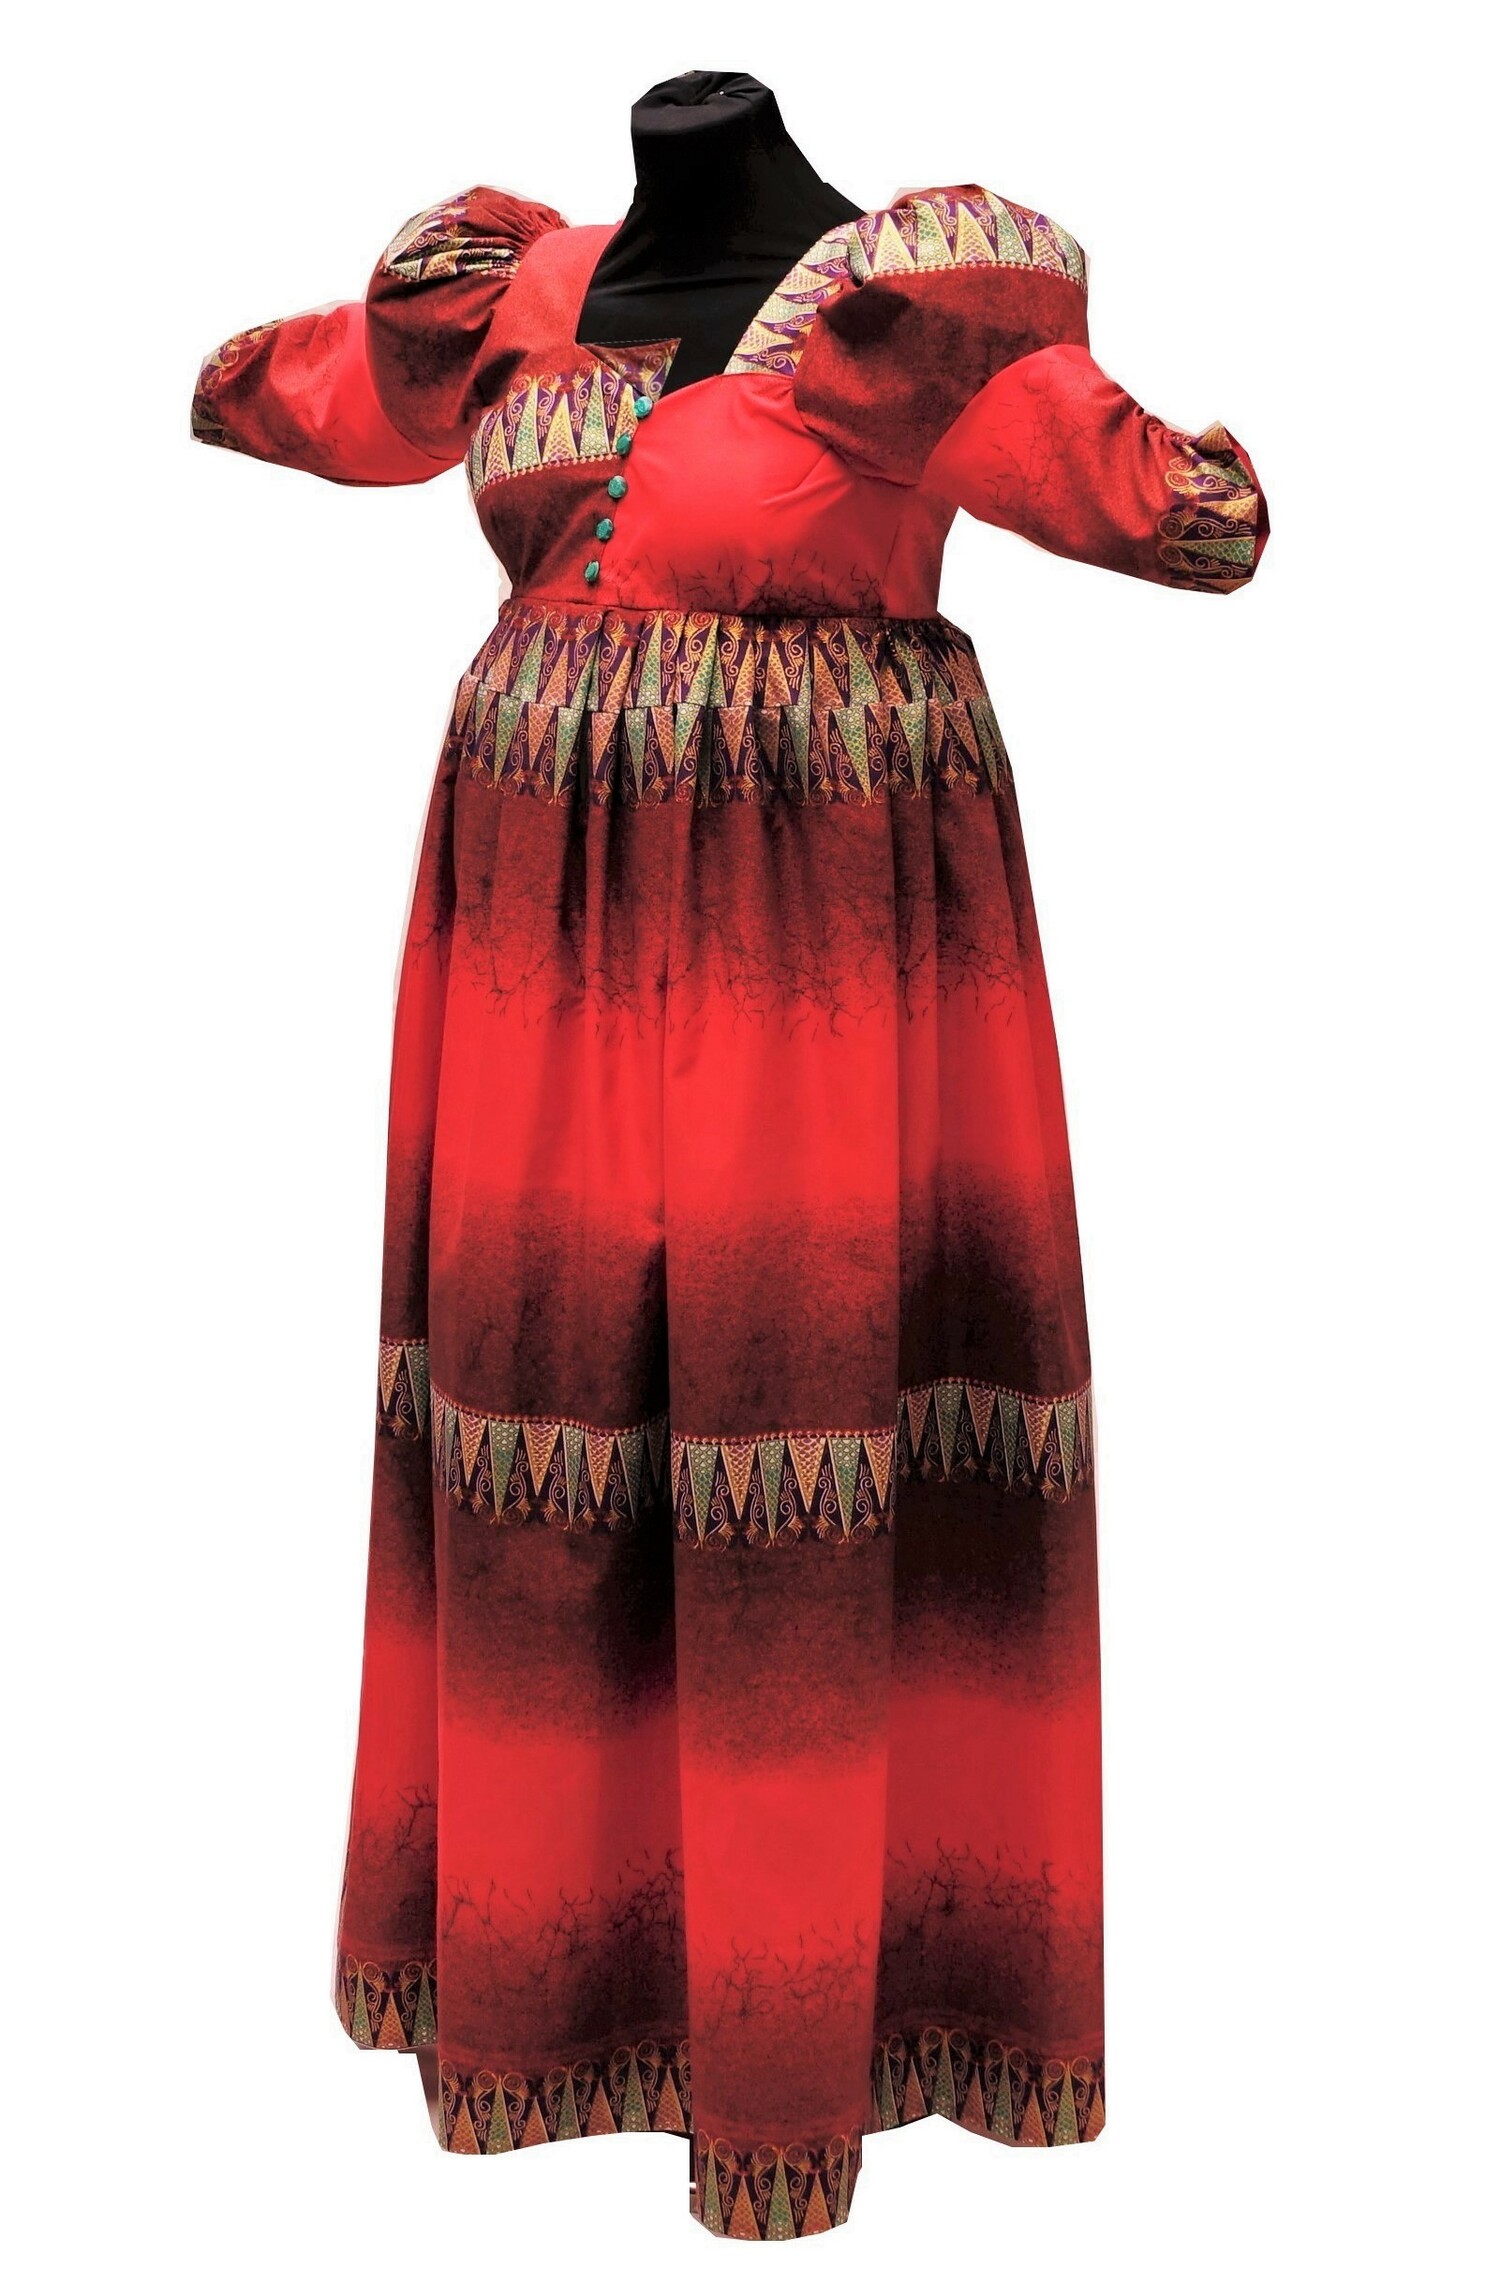 Dress from Namibia (TRC 2022.3119a).